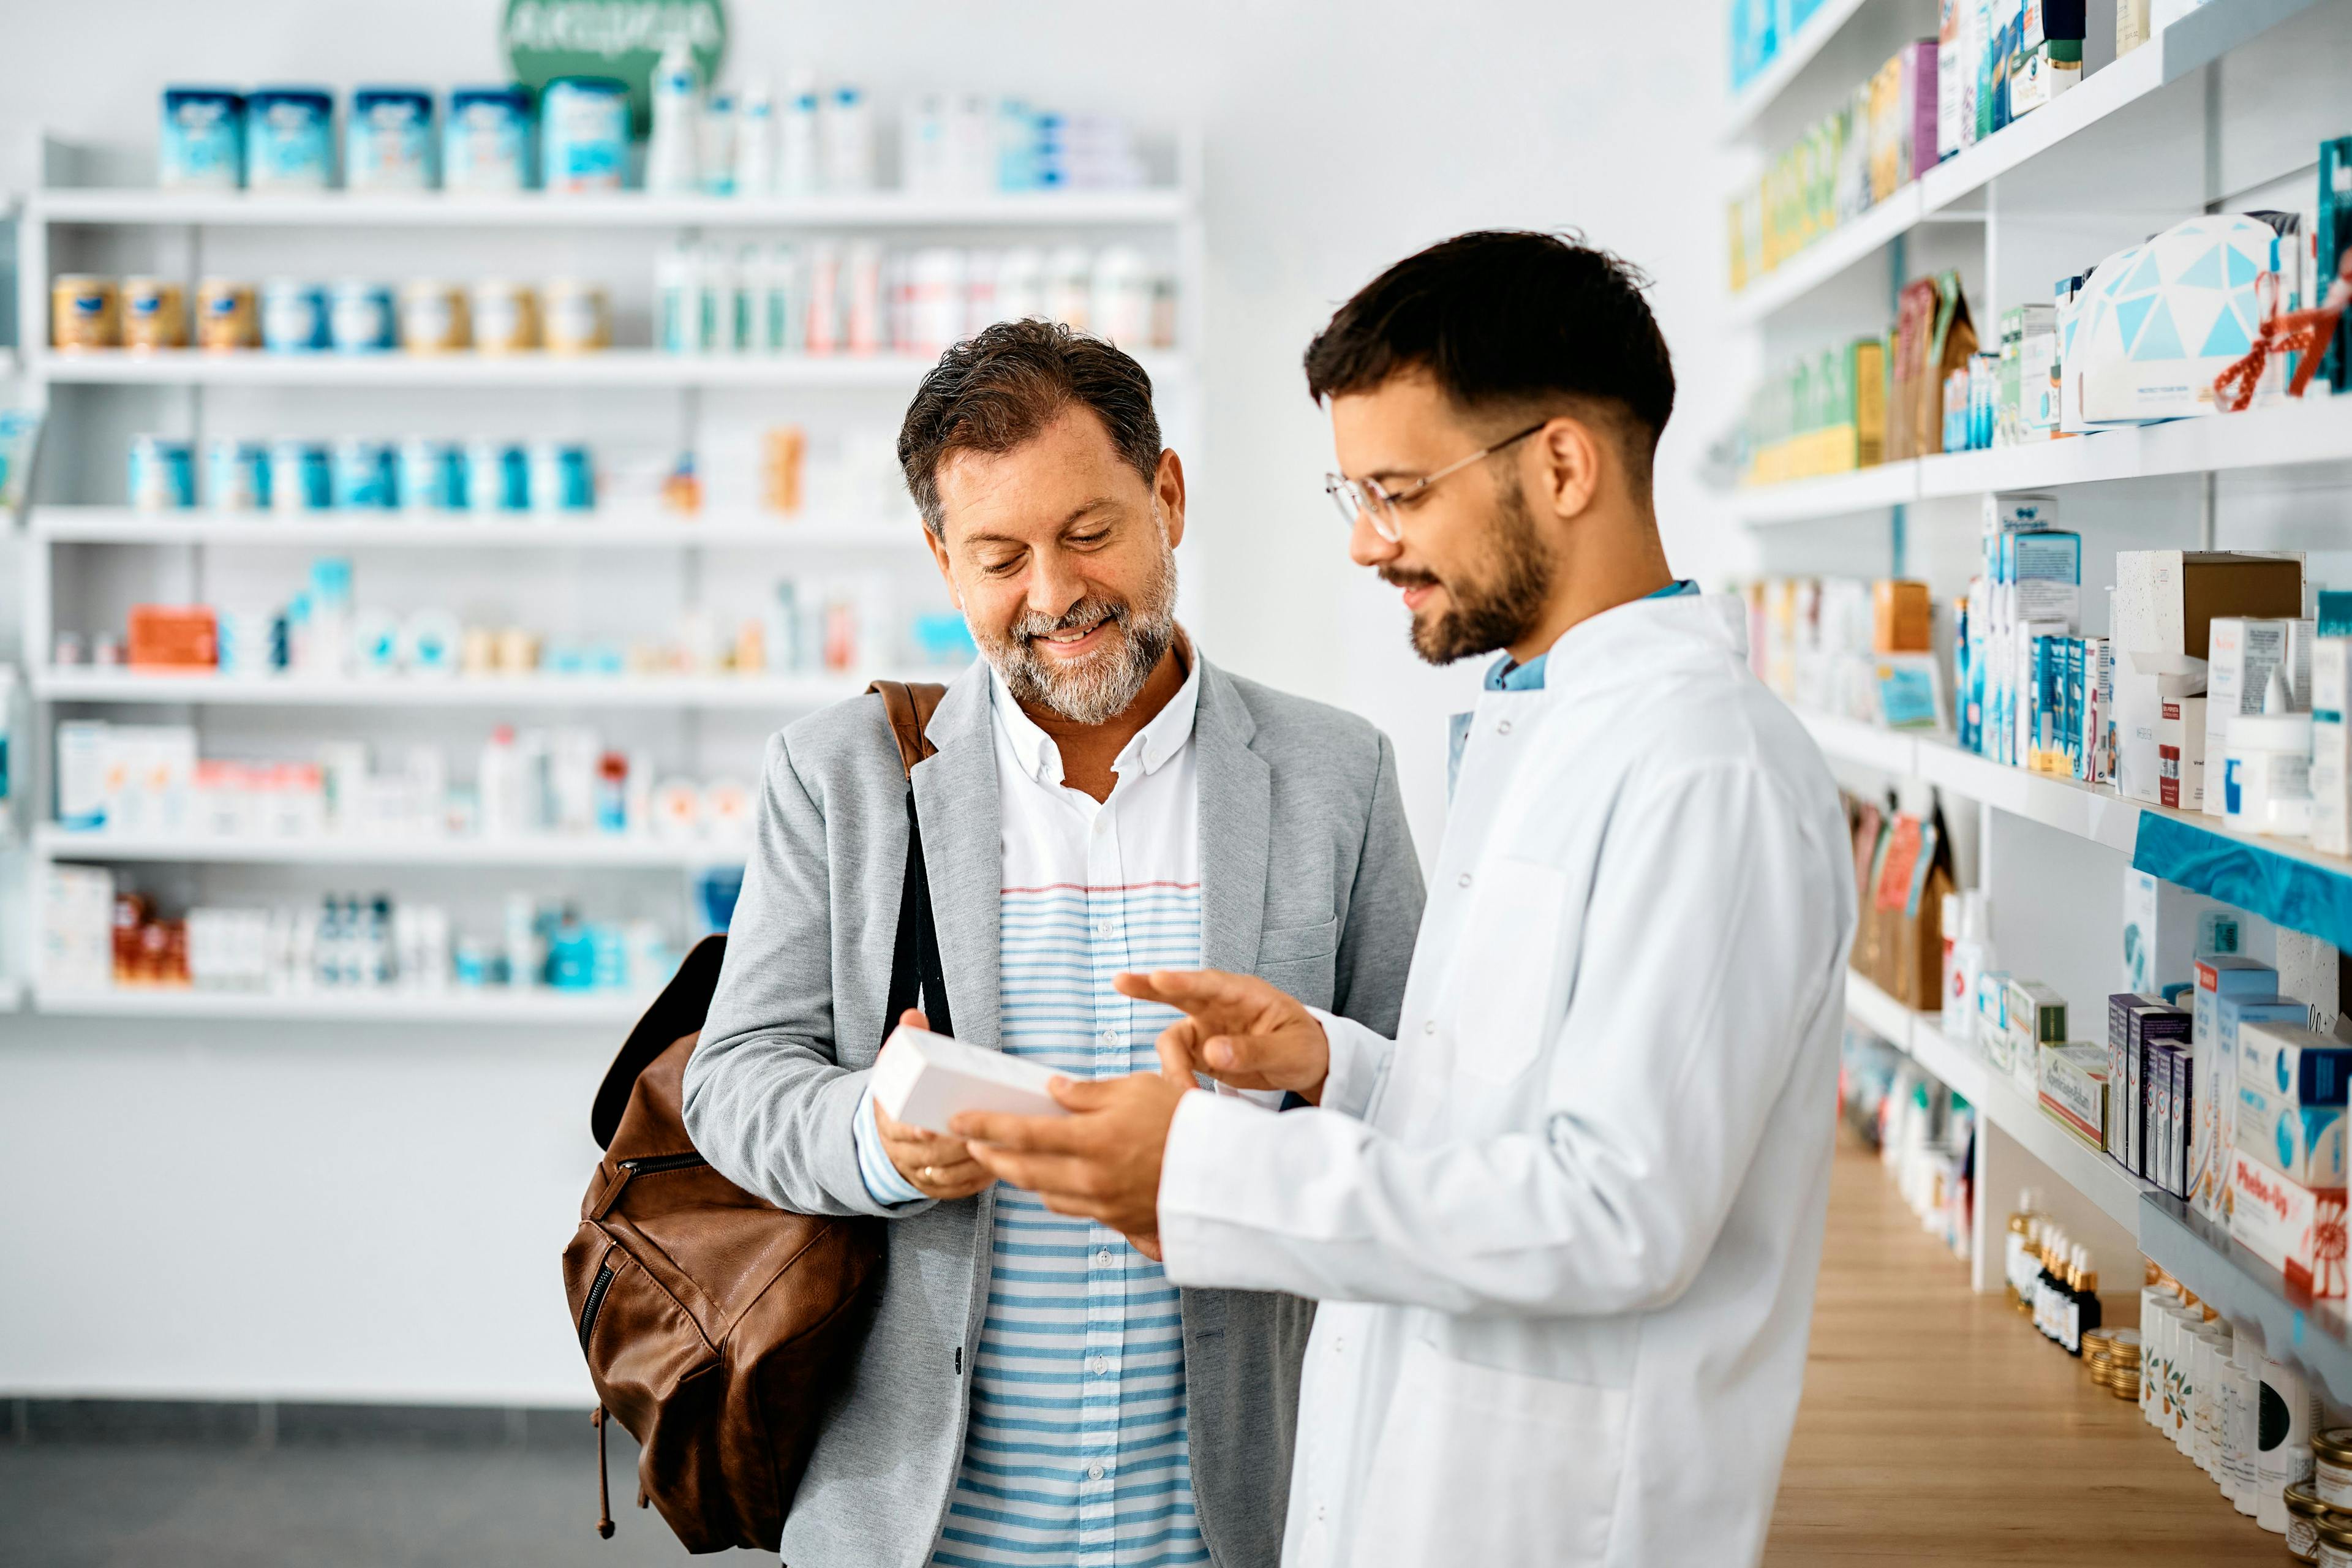 Happy man chooses medicine with help of young pharmacist in drugstore | Image Credit: Drazen - stock.adobe.com